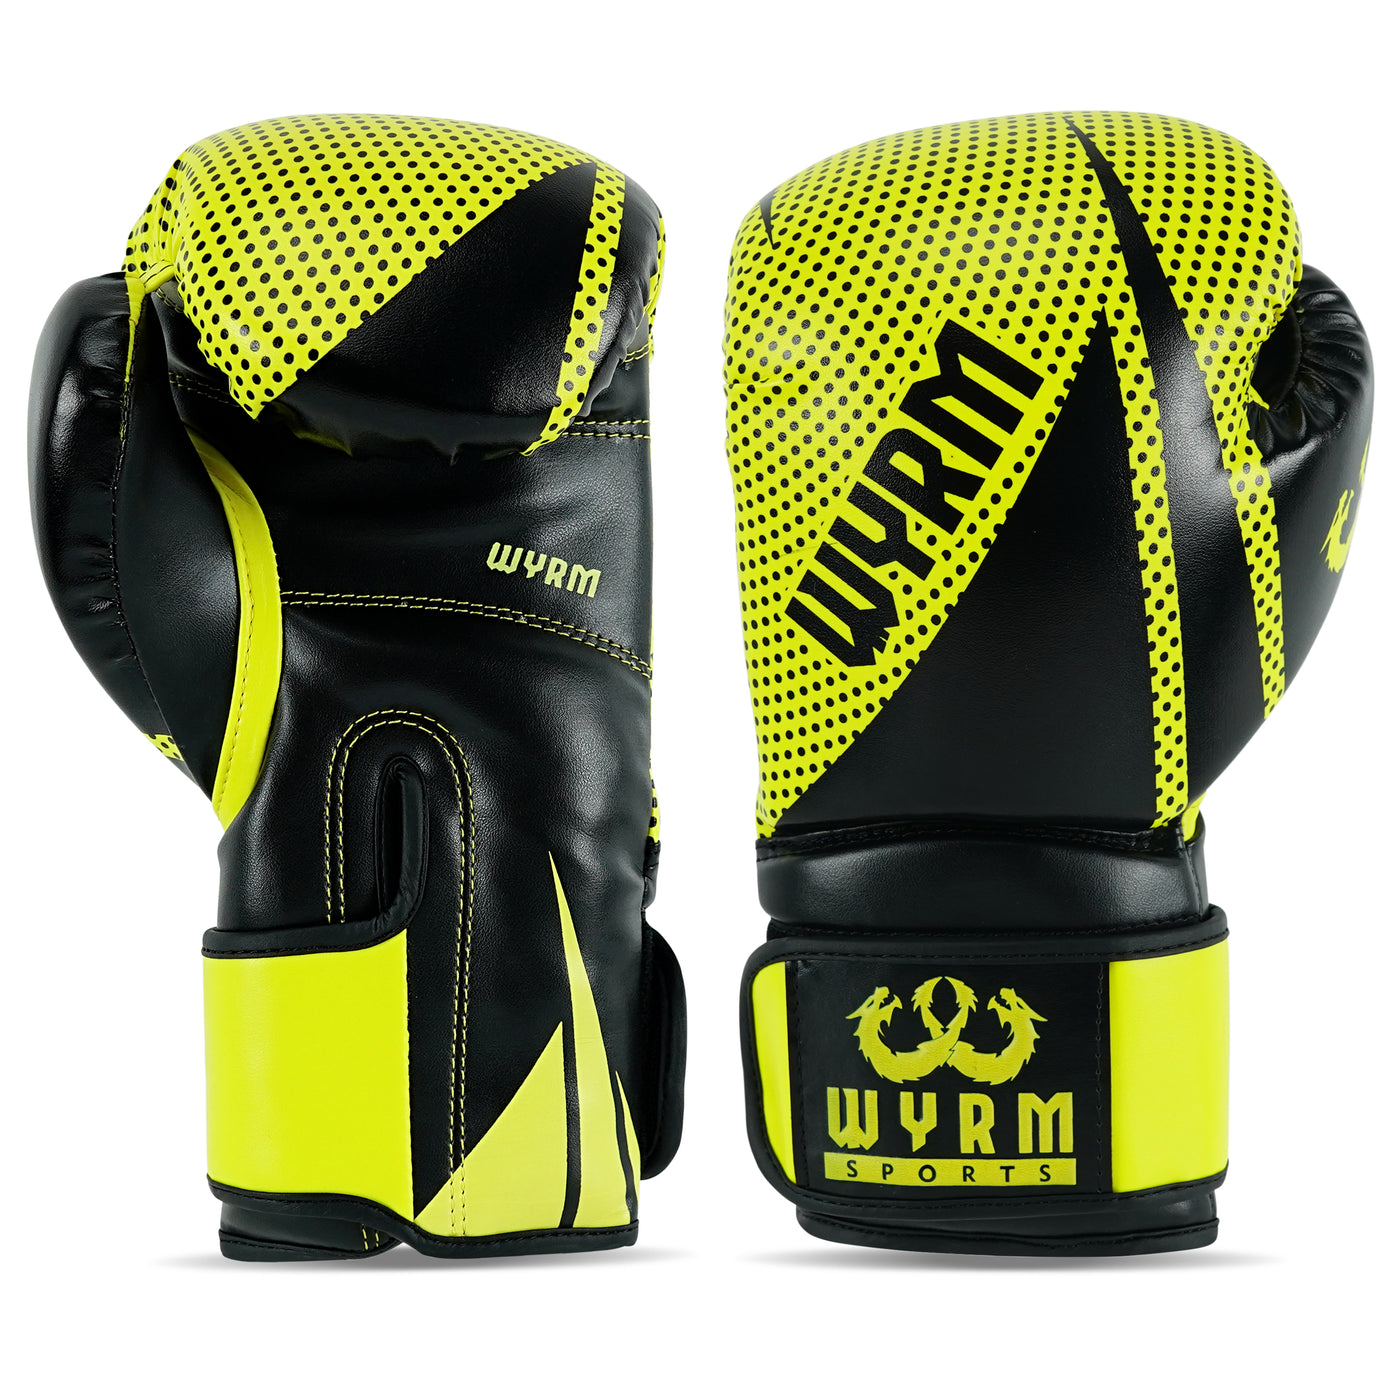 Krusher Yellow/Black Leather Boxing Gloves